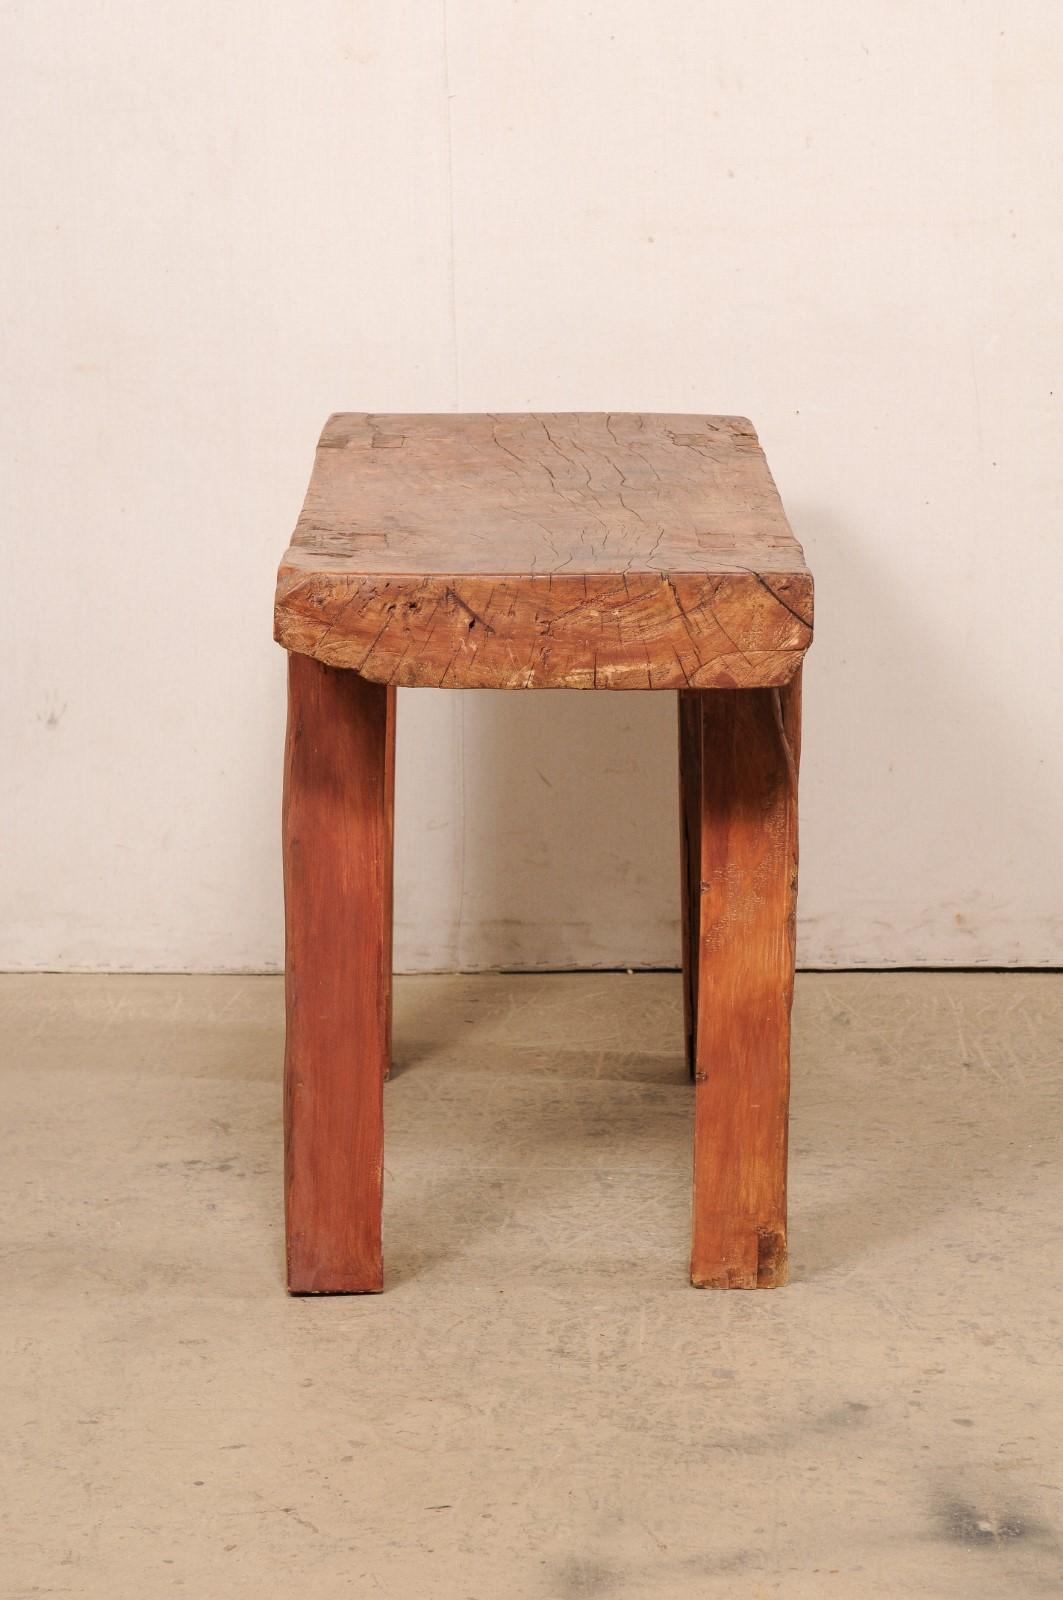 20th Century Beautifully Rustic Thick Chopping Block Top Table Would Be a Great Sink Base